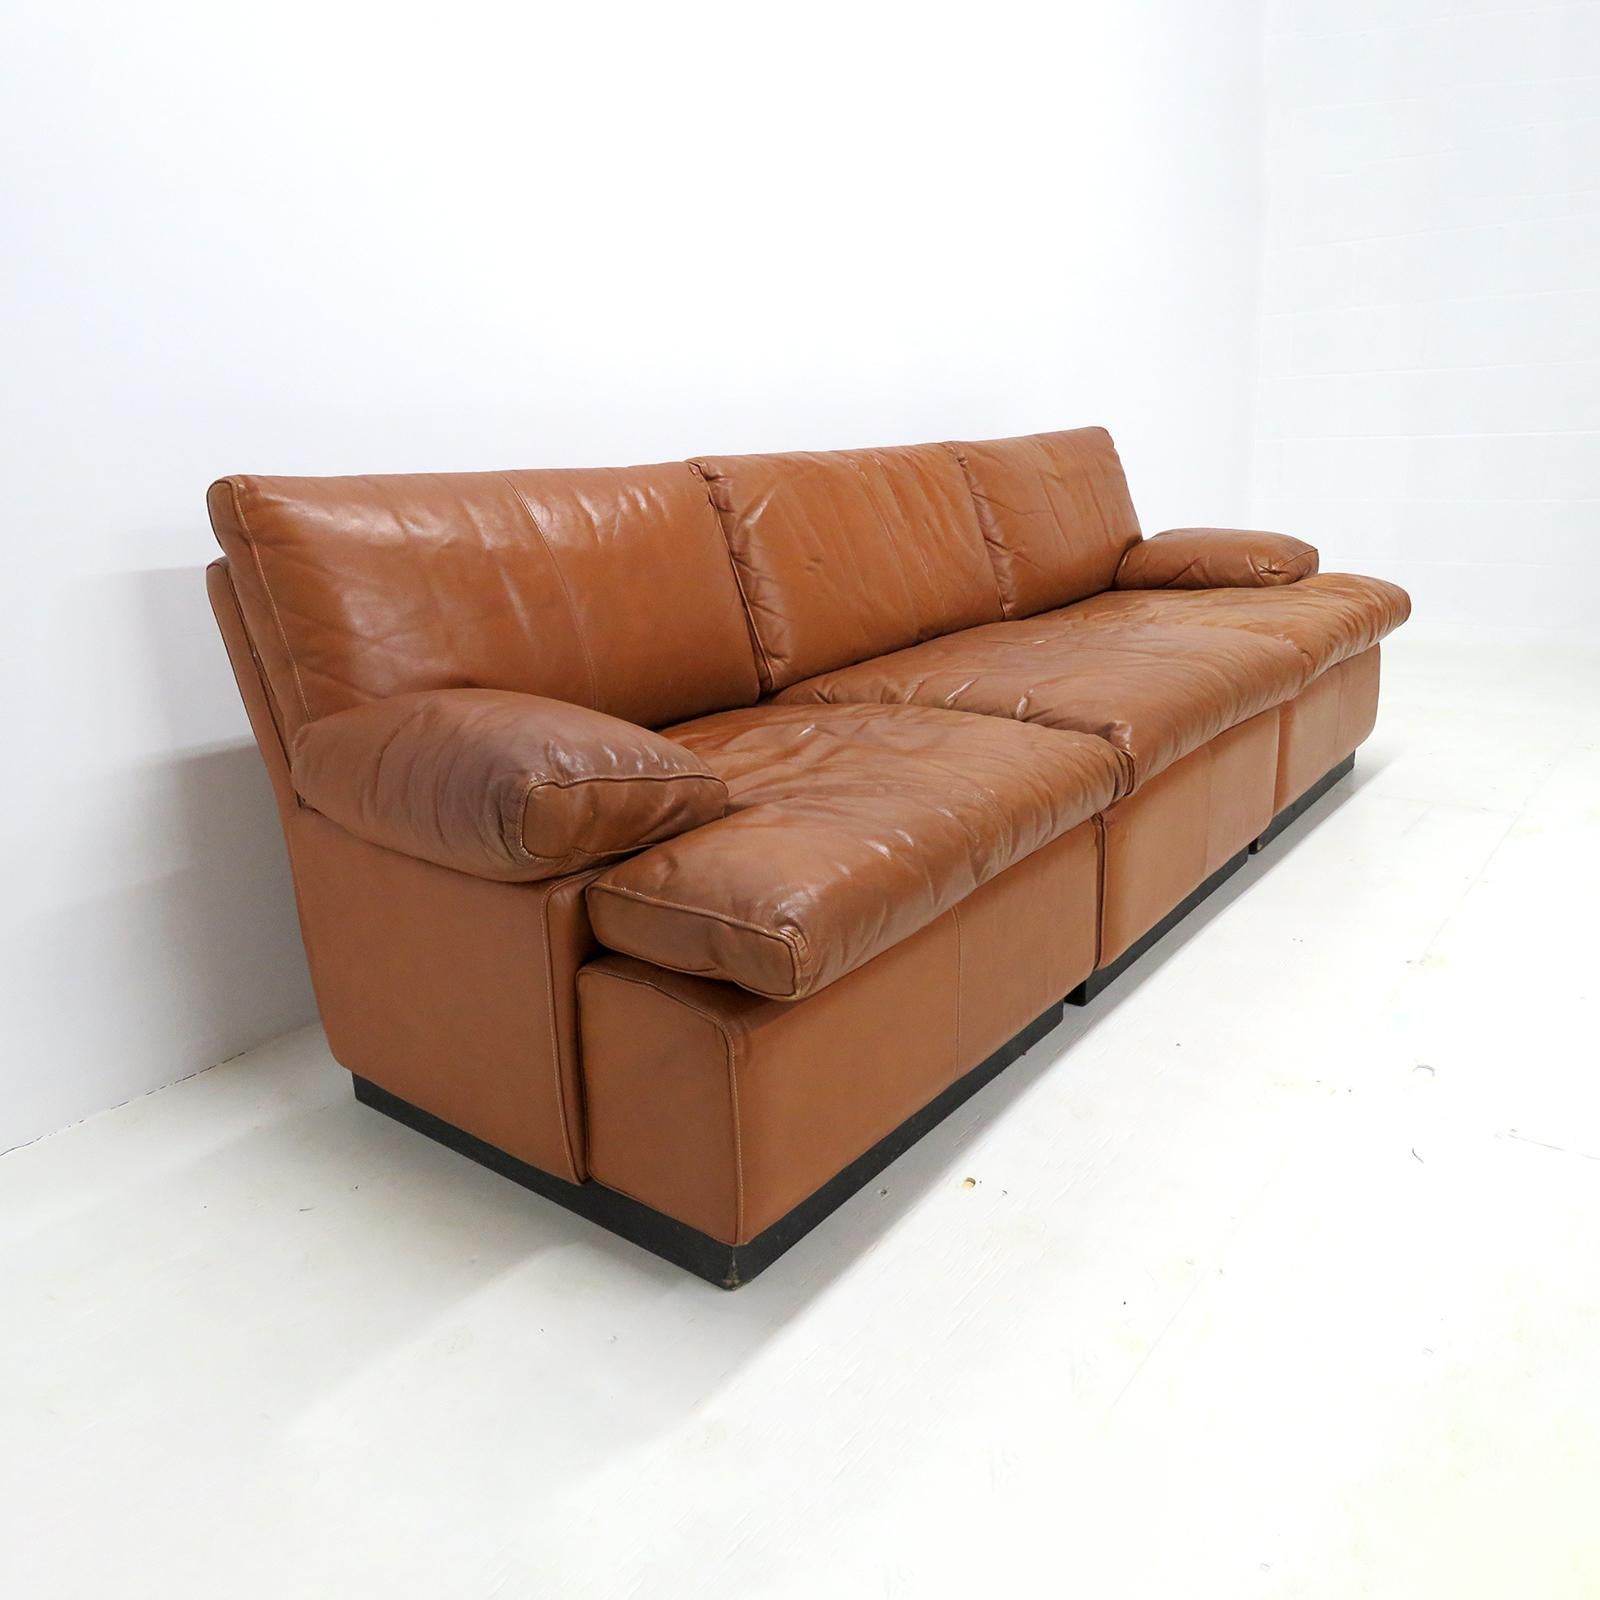 Stained Finnish Modular Leather Sofa by BJ Dahlquist, 1970